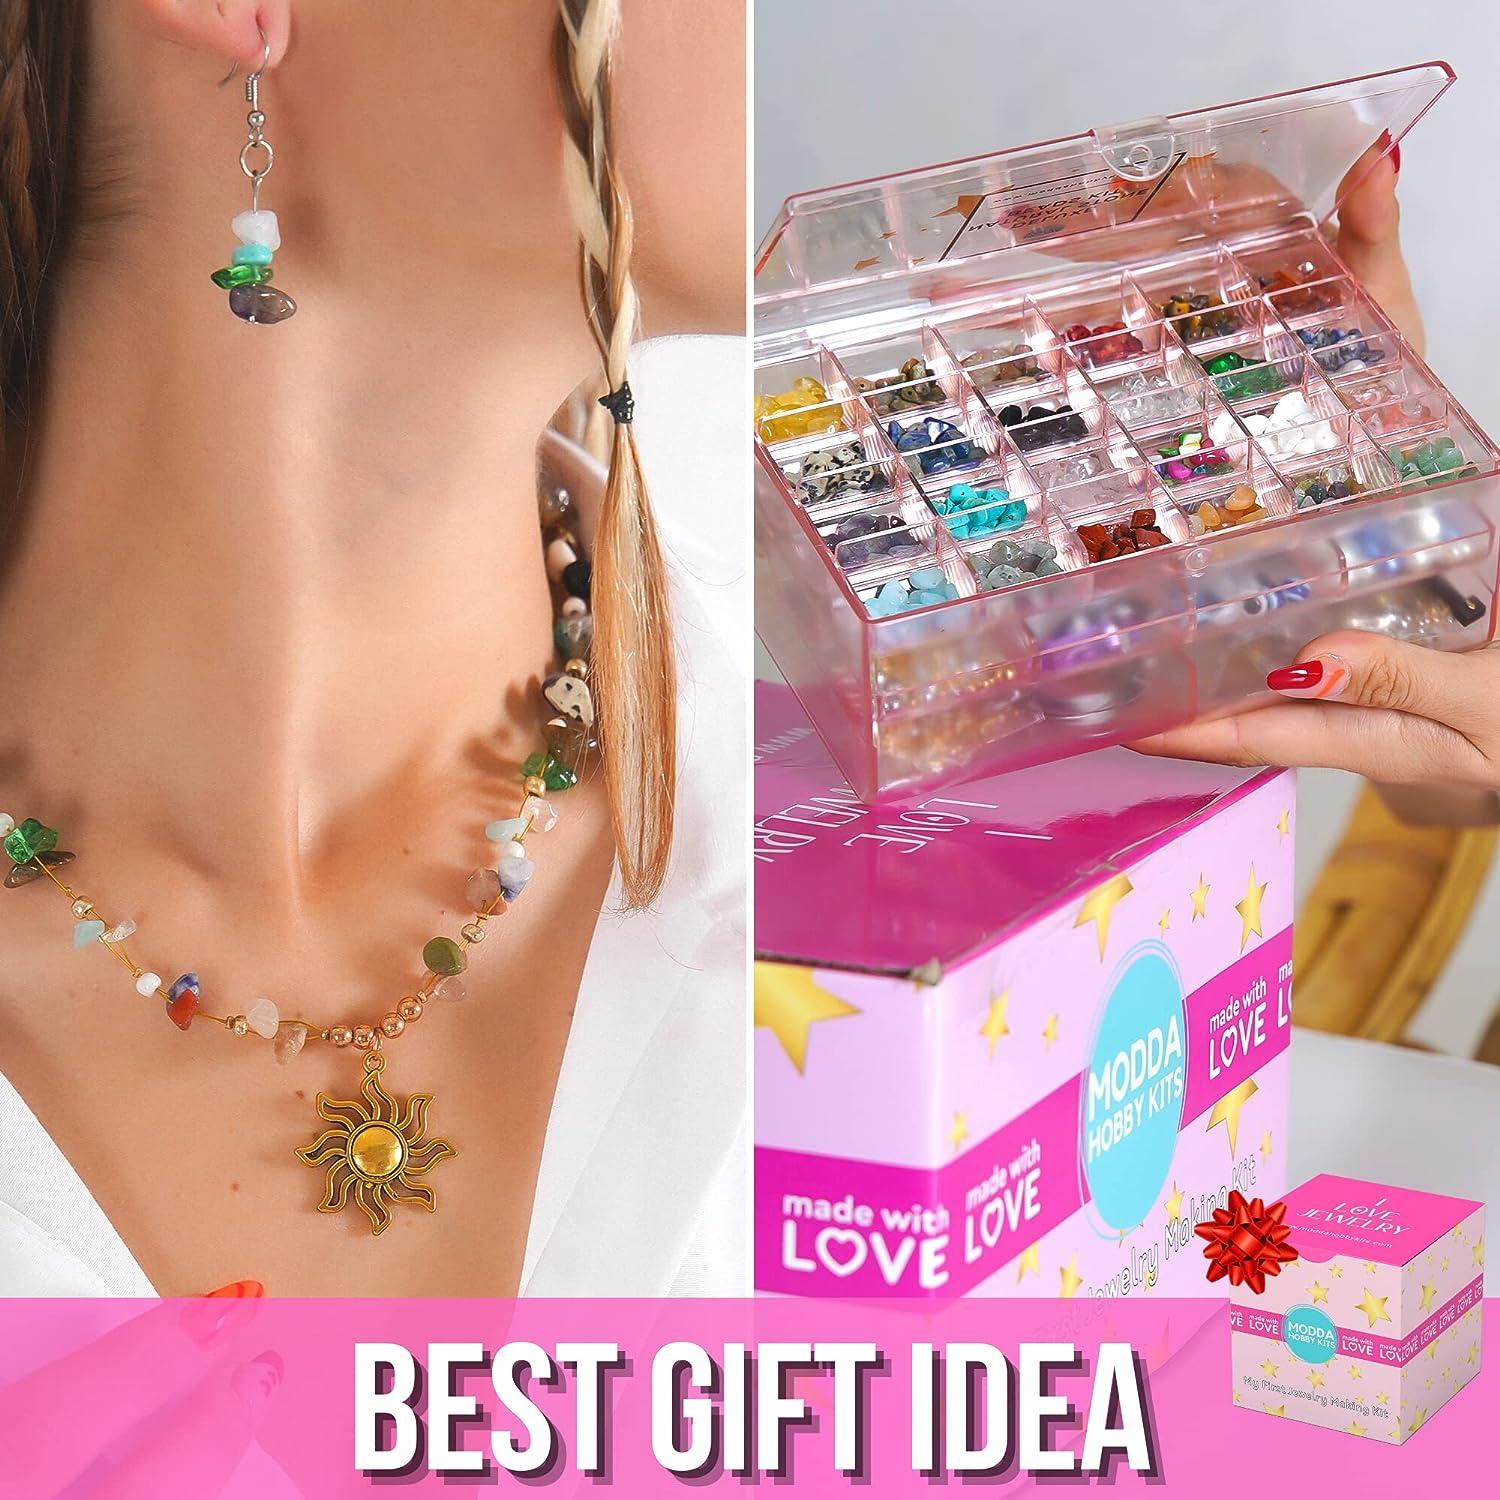 MODDA Deluxe Jewelry Making Kit with Video Course and Instructions